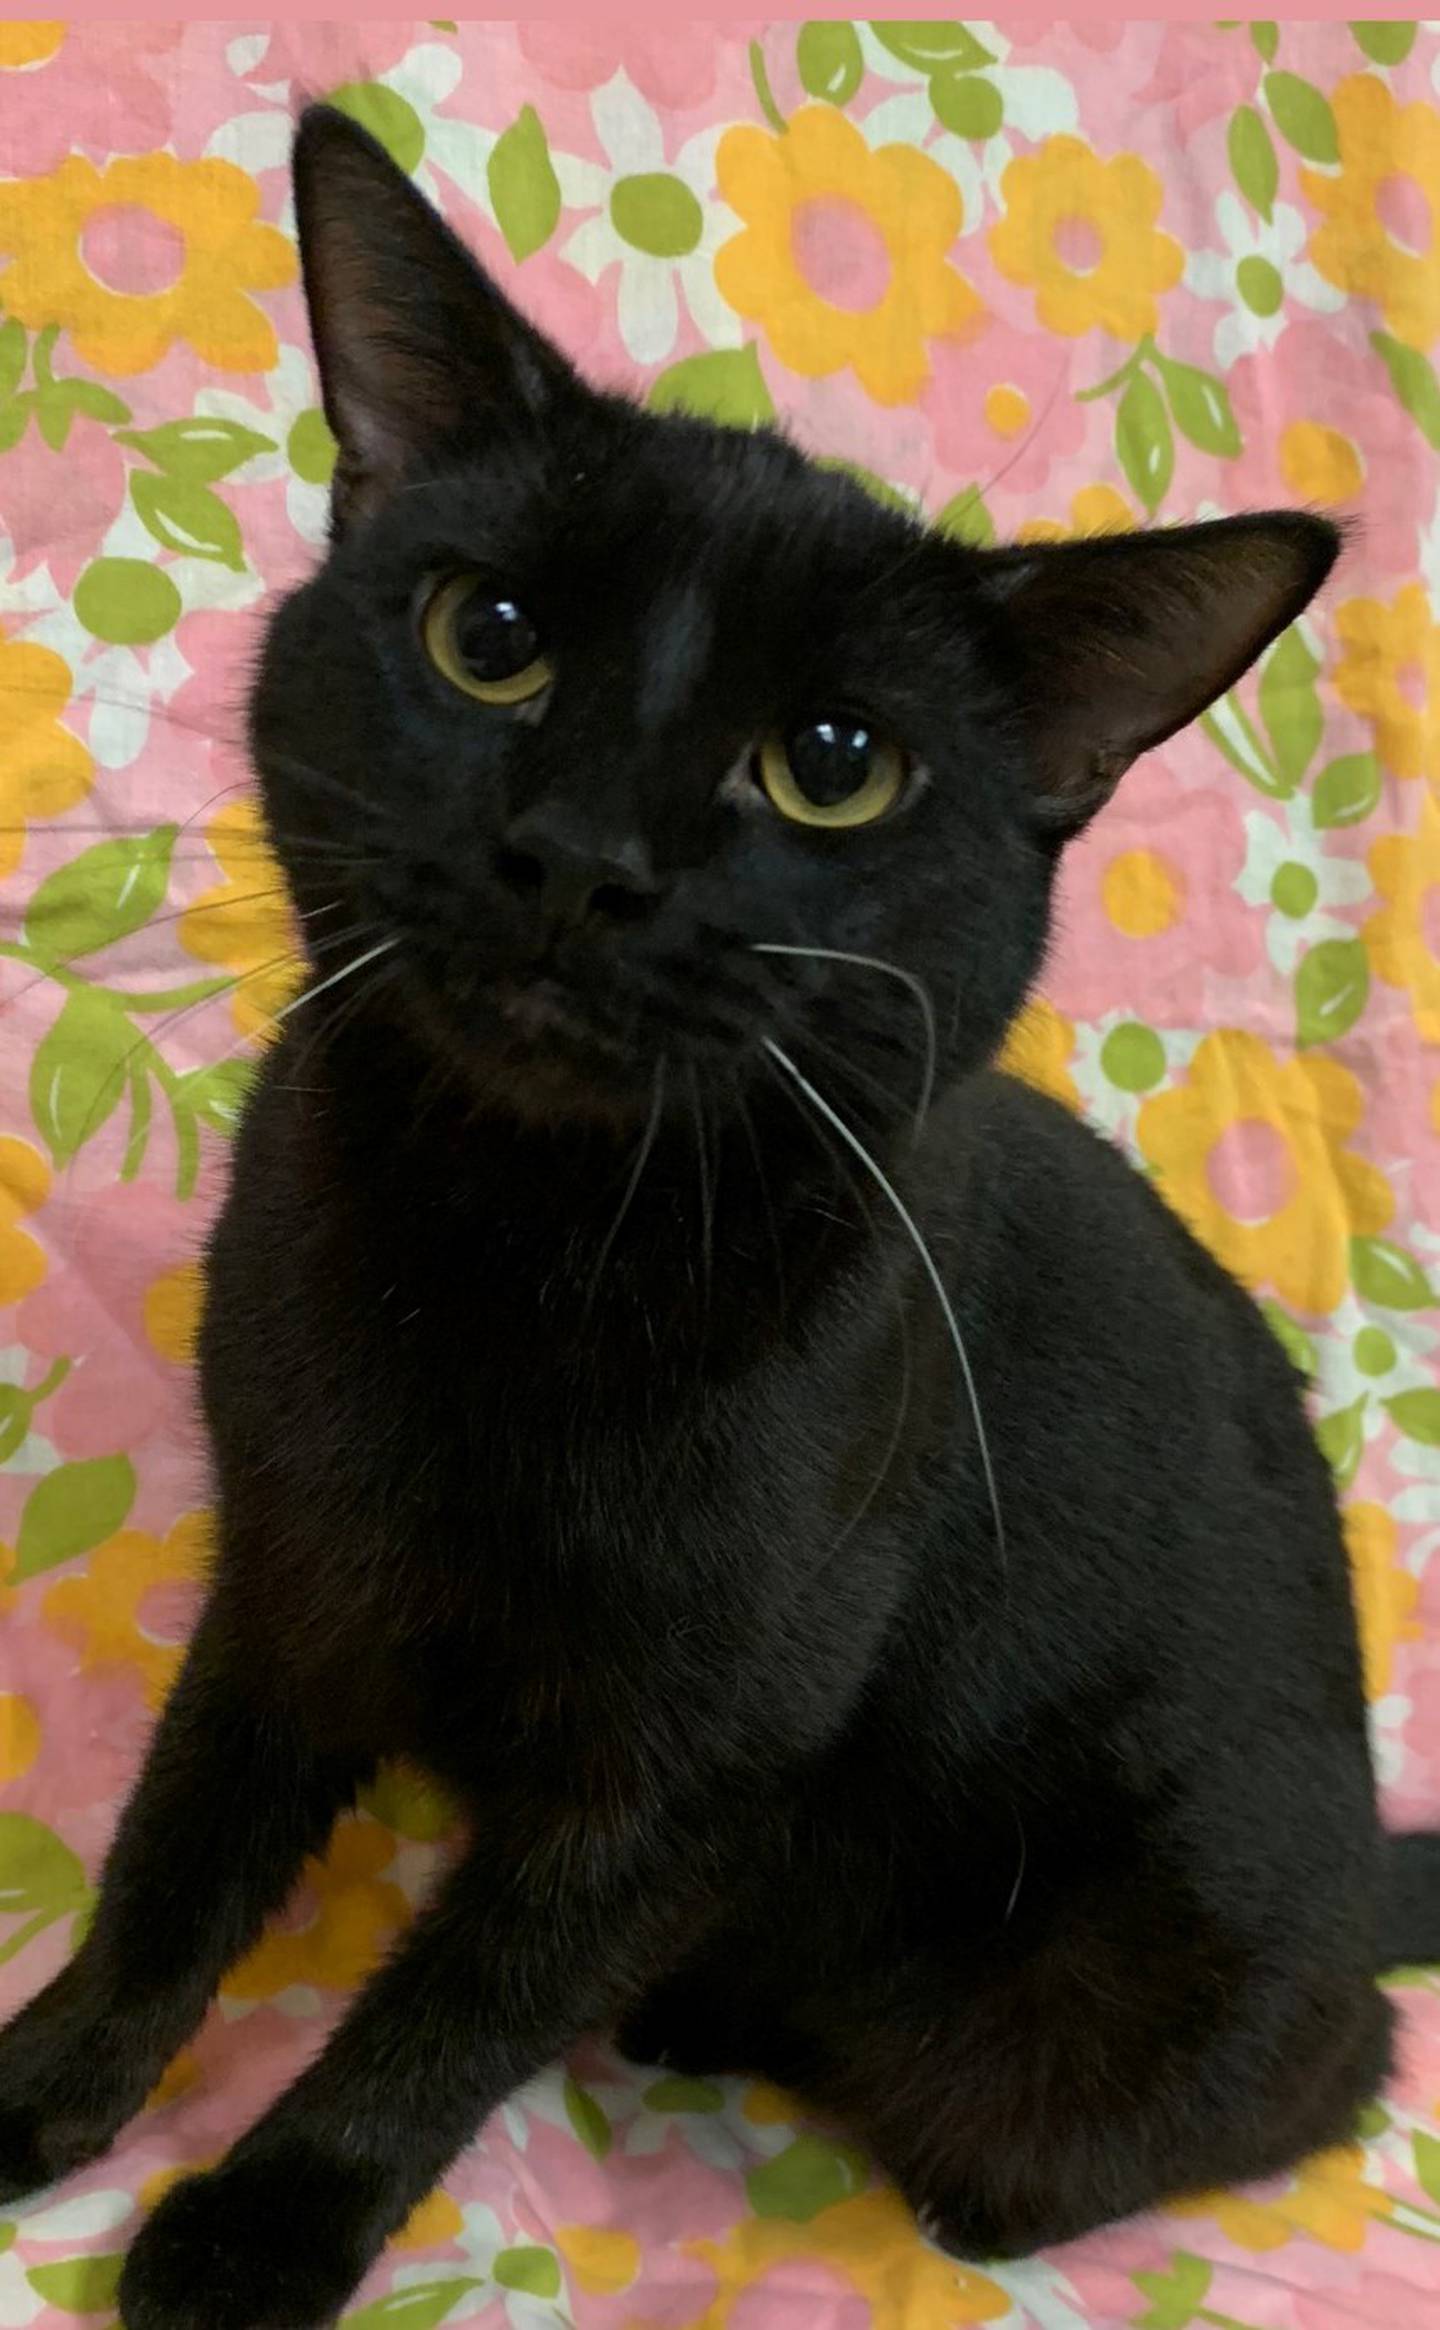 Meet Calla, who was left behind during an eviction. She is affectionate when petted and loves attention. She loves her catnip toys and will even roll over for belly rubs. She is cat-friendly but very scared of dogs. To meet Calla, call Joliet Township Animal Control for details 815-725-0333.